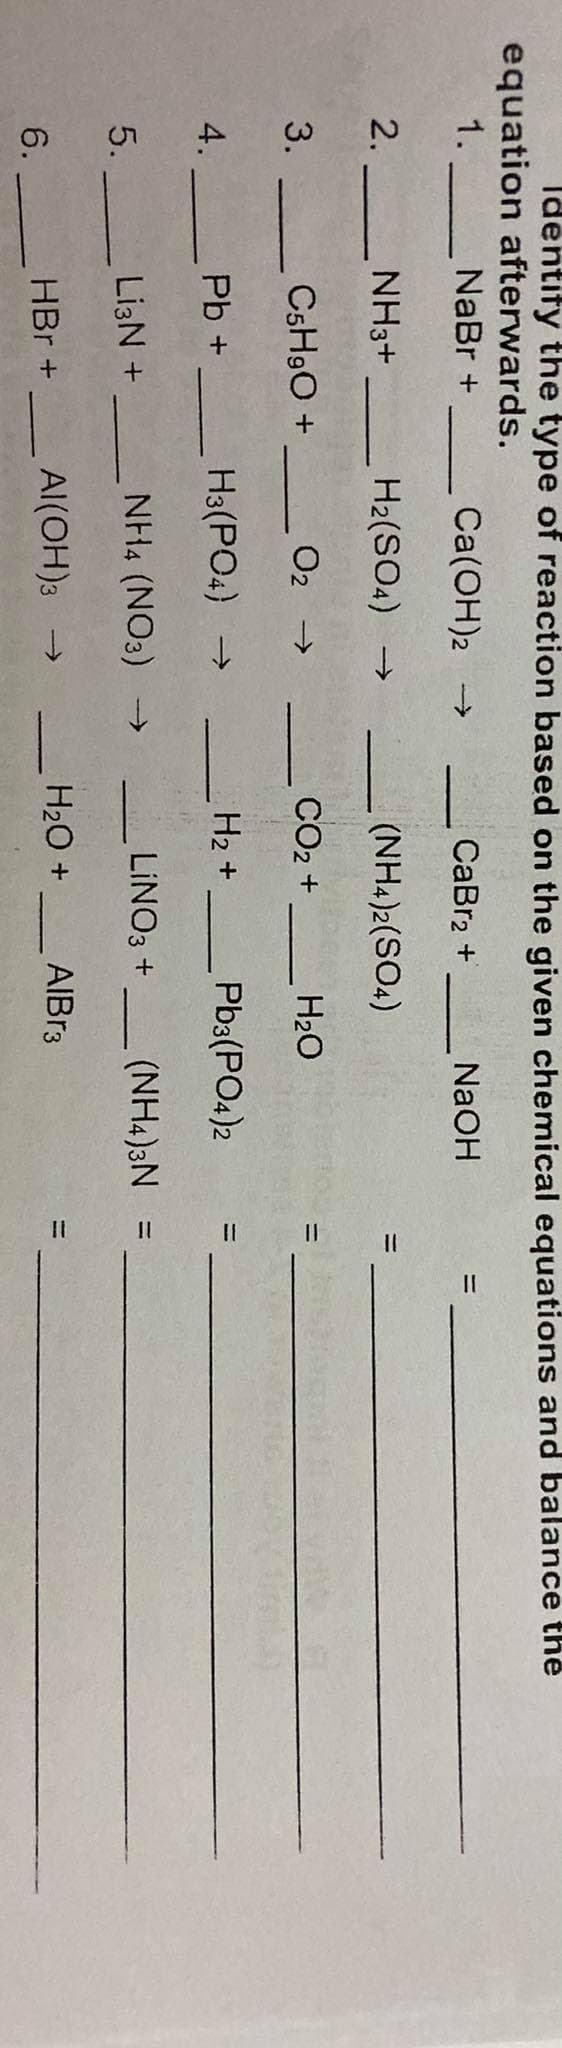 Identify the type of reaction based on the given chemical equations and balance the
equation afterwards.
NaBr +
1.
Ca(OH)2 →
CaBr2 +
NaOH
%3D
2. -
NH3+
H2(SO4) →
(NH4)2(SO4)
3.
C5H9O +
O2 >
CO2 +
H20
H3(PO4) →
H2 +
Pb3(PO4)2
%3D
4.
Pb +
NH4 (NO3) -→
LINO3 +
(NH4)3N =
%3D
5.
Li3N +
HBr +
Al(OH)3 →
H20 +
AIBR3
6.
